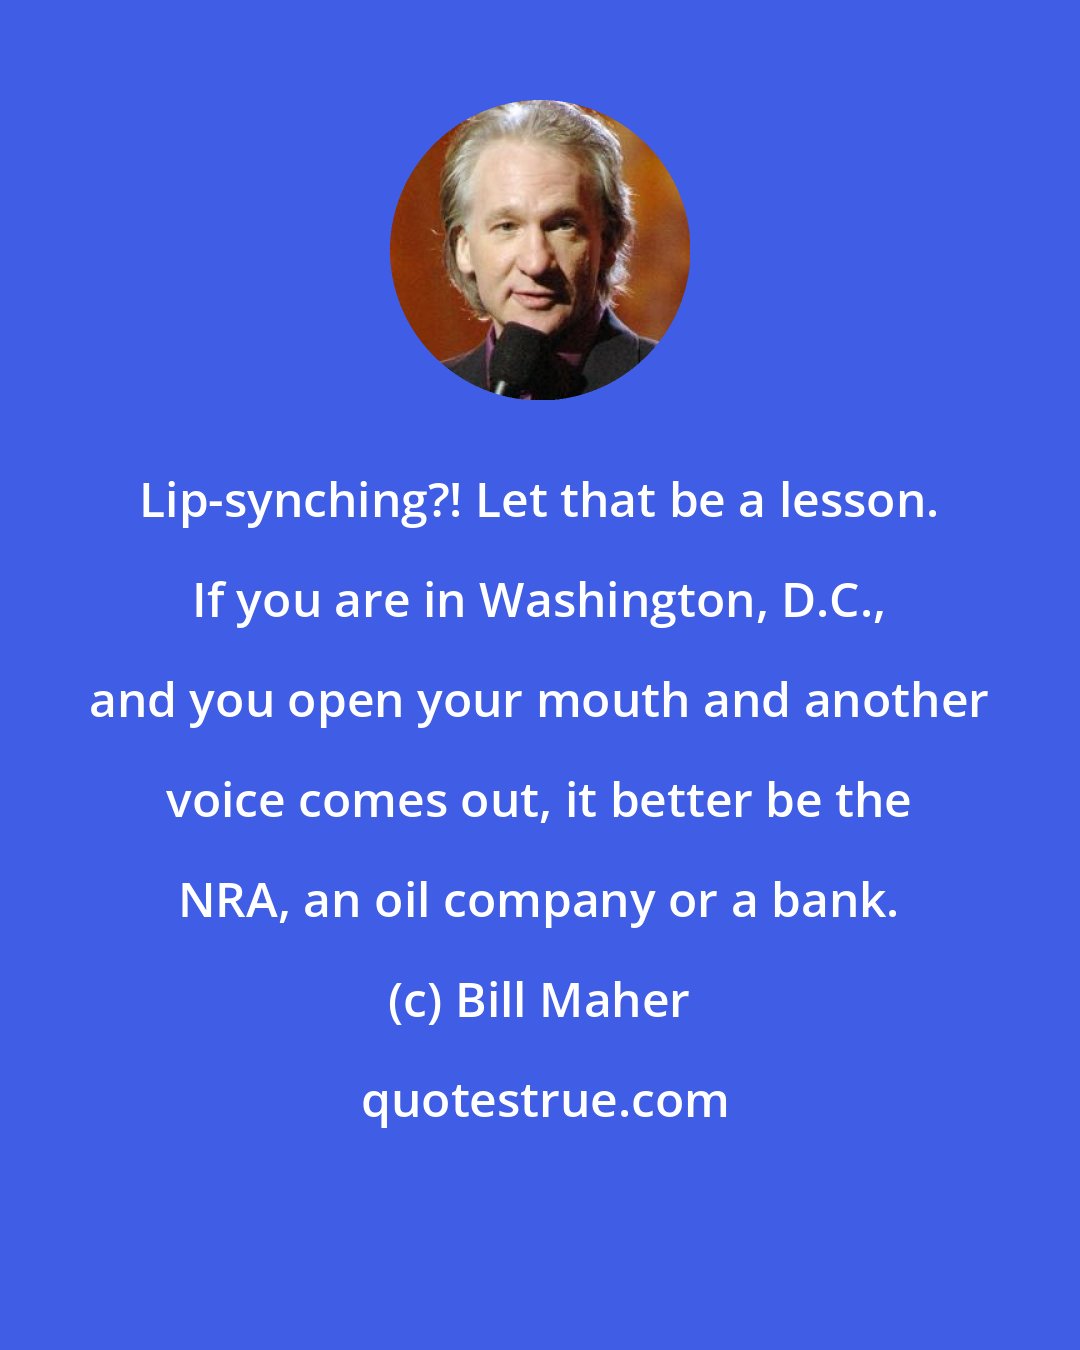 Bill Maher: Lip-synching?! Let that be a lesson. If you are in Washington, D.C., and you open your mouth and another voice comes out, it better be the NRA, an oil company or a bank.